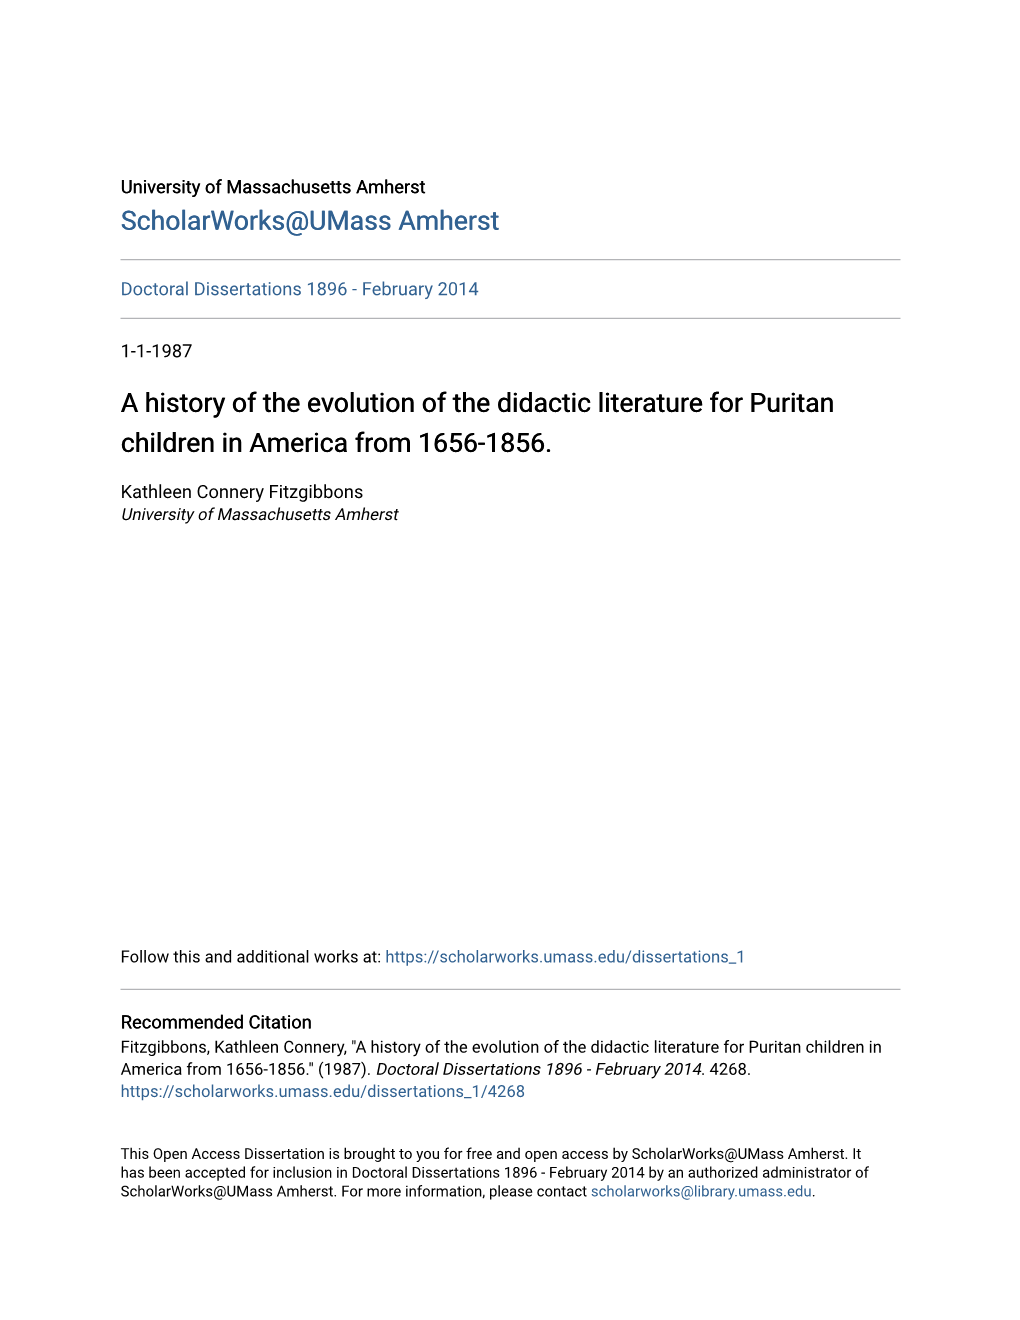 A History of the Evolution of the Didactic Literature for Puritan Children in America from 1656-1856